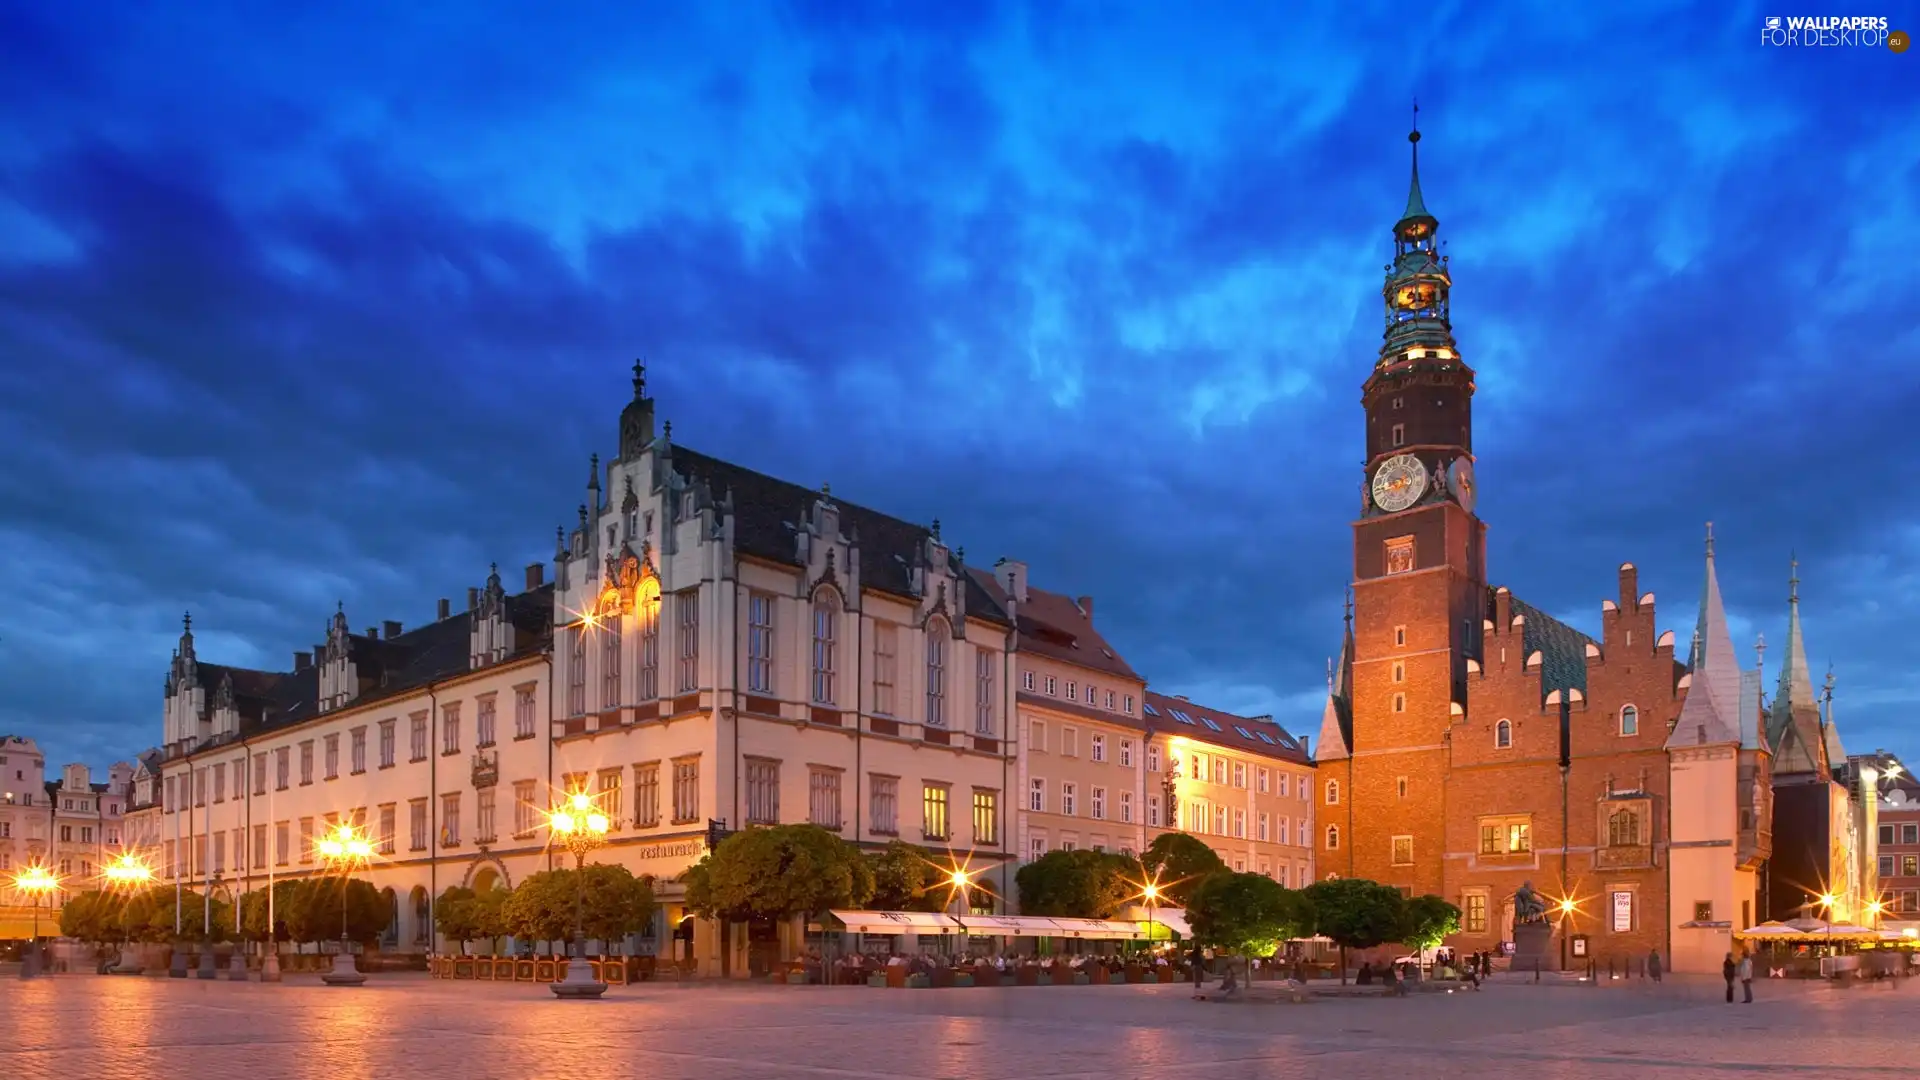 Houses, Wroclaw, Poland, town hall